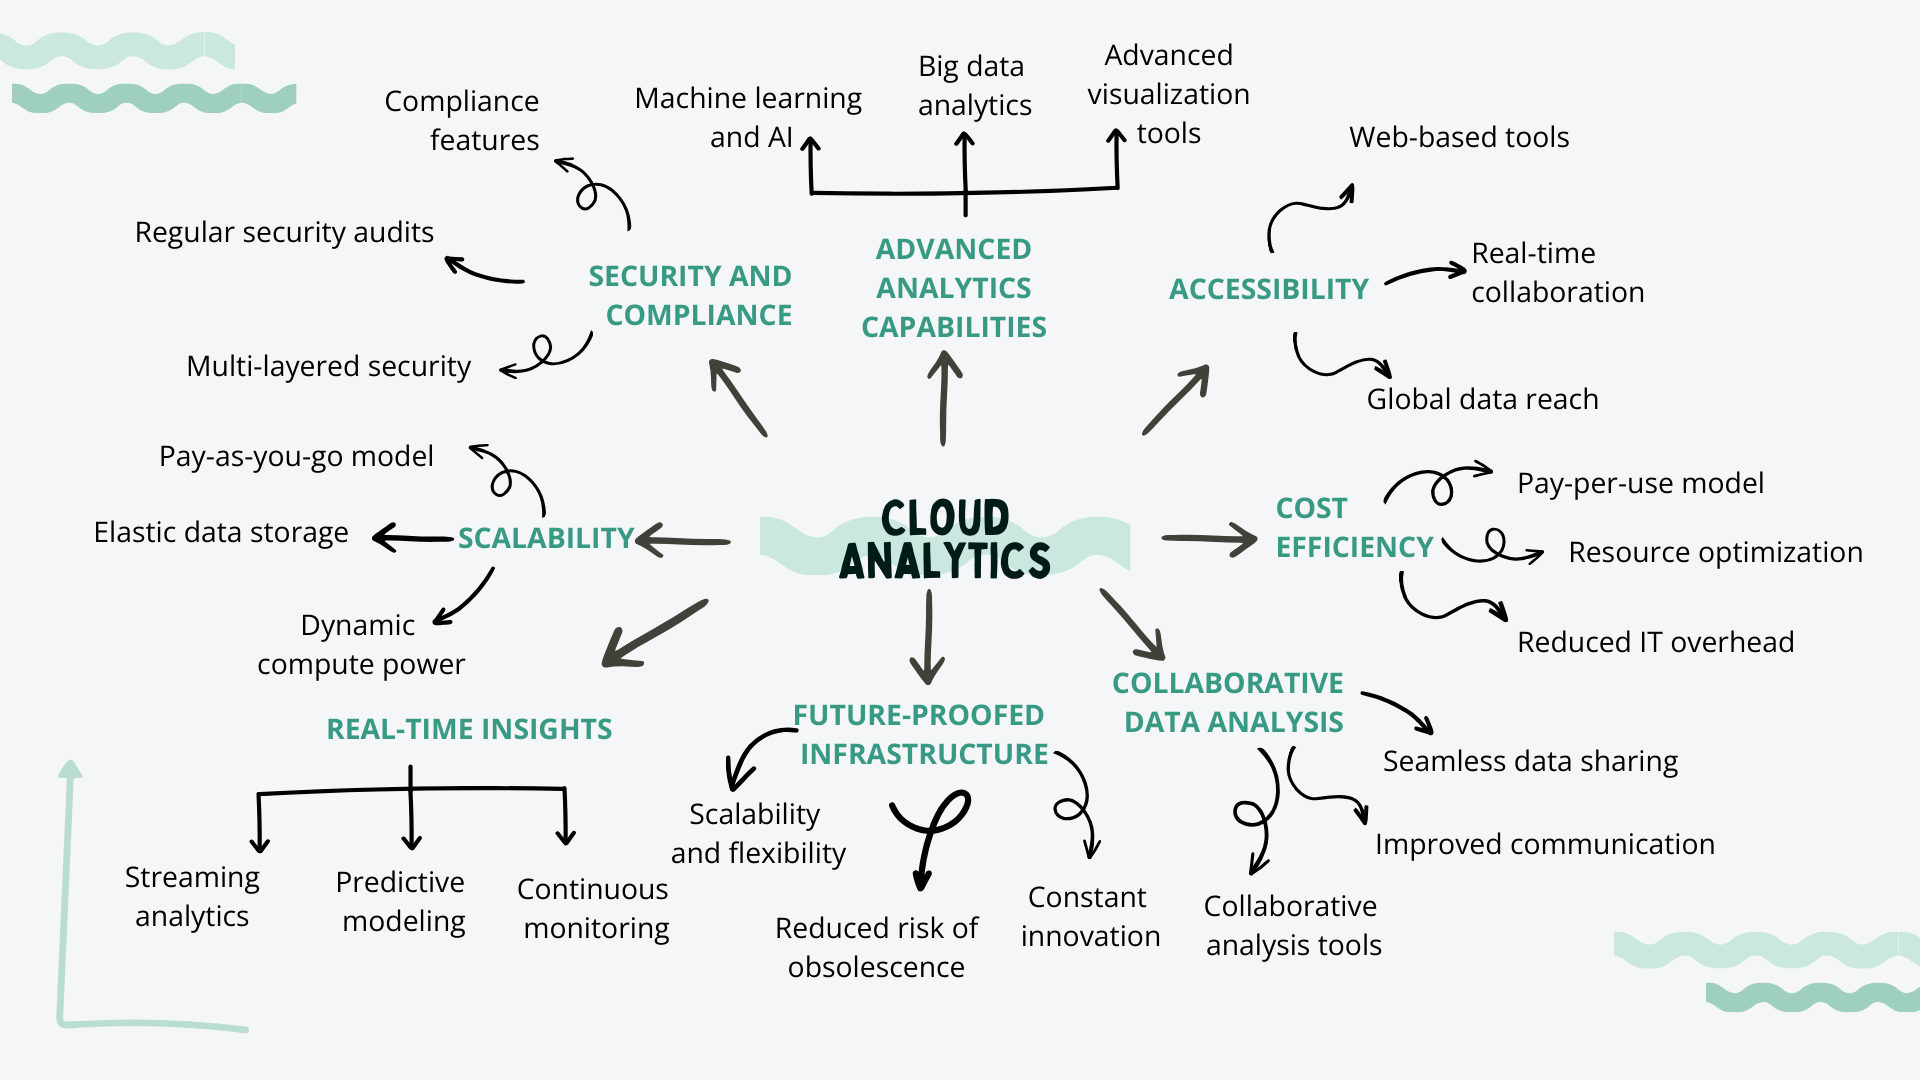 The image depicts a mind map representing many advantages of cloud analytics